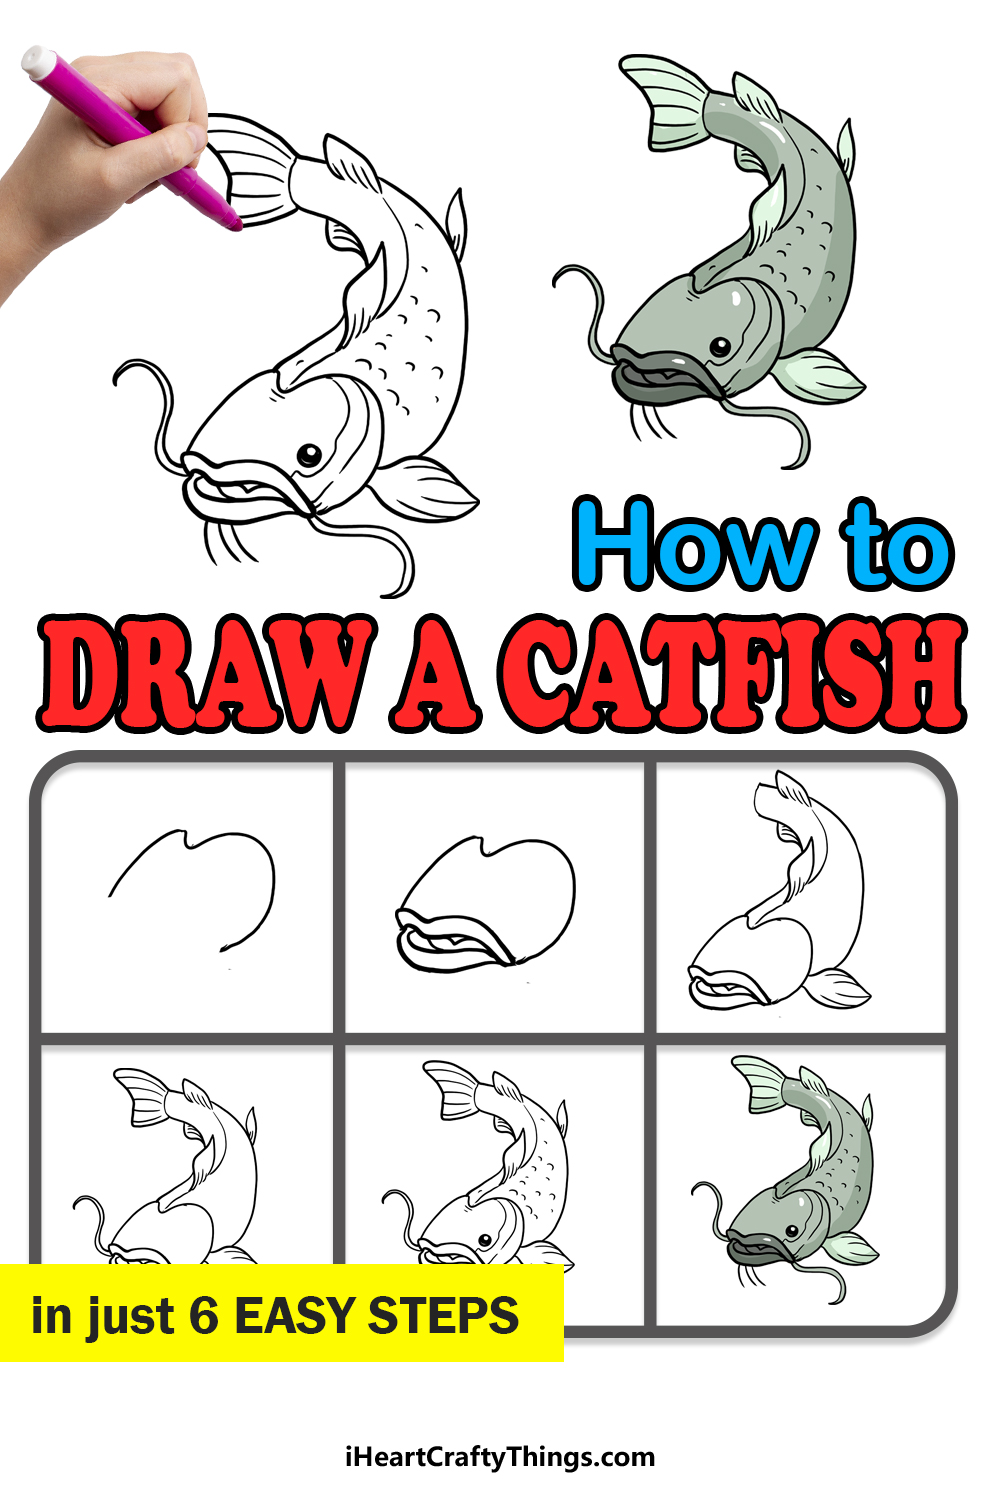 How to Draw A Catfish step by step guide